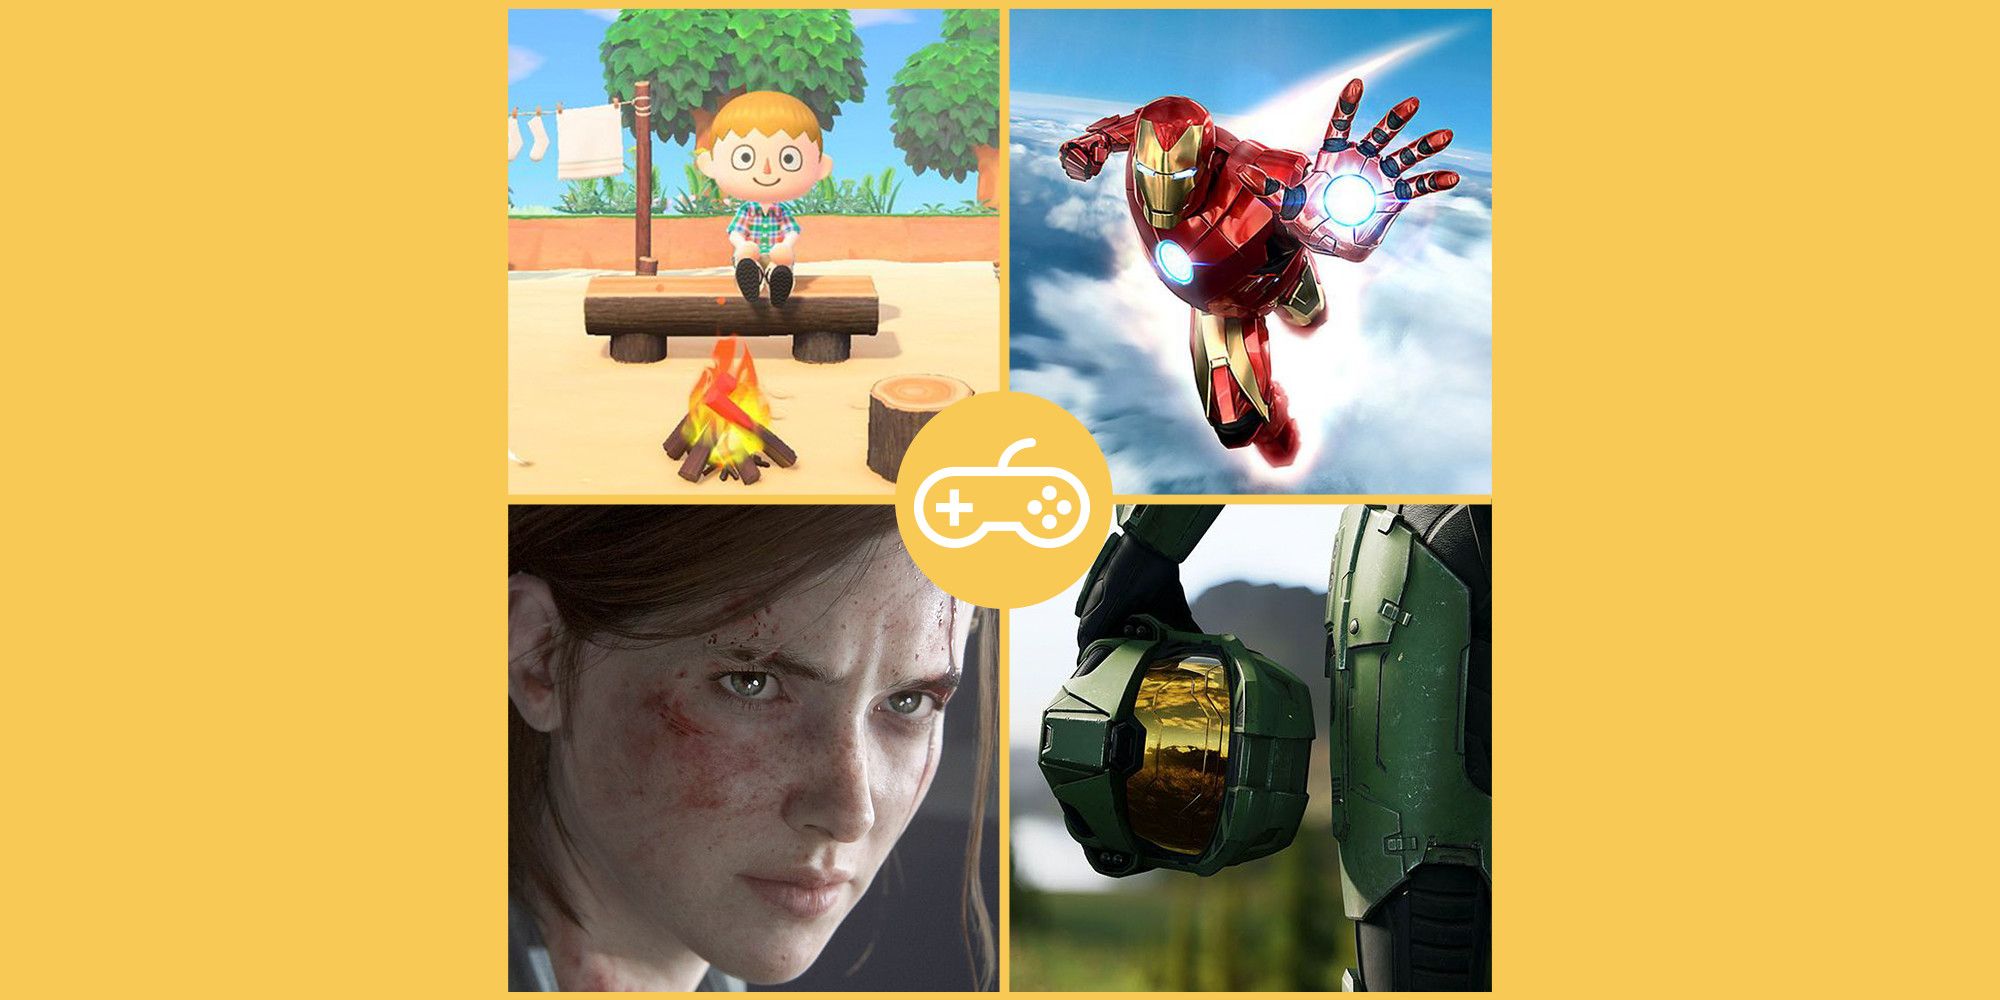 25 Best Video Games Of 2020 Most Anticipated Gaming Releases In 2020